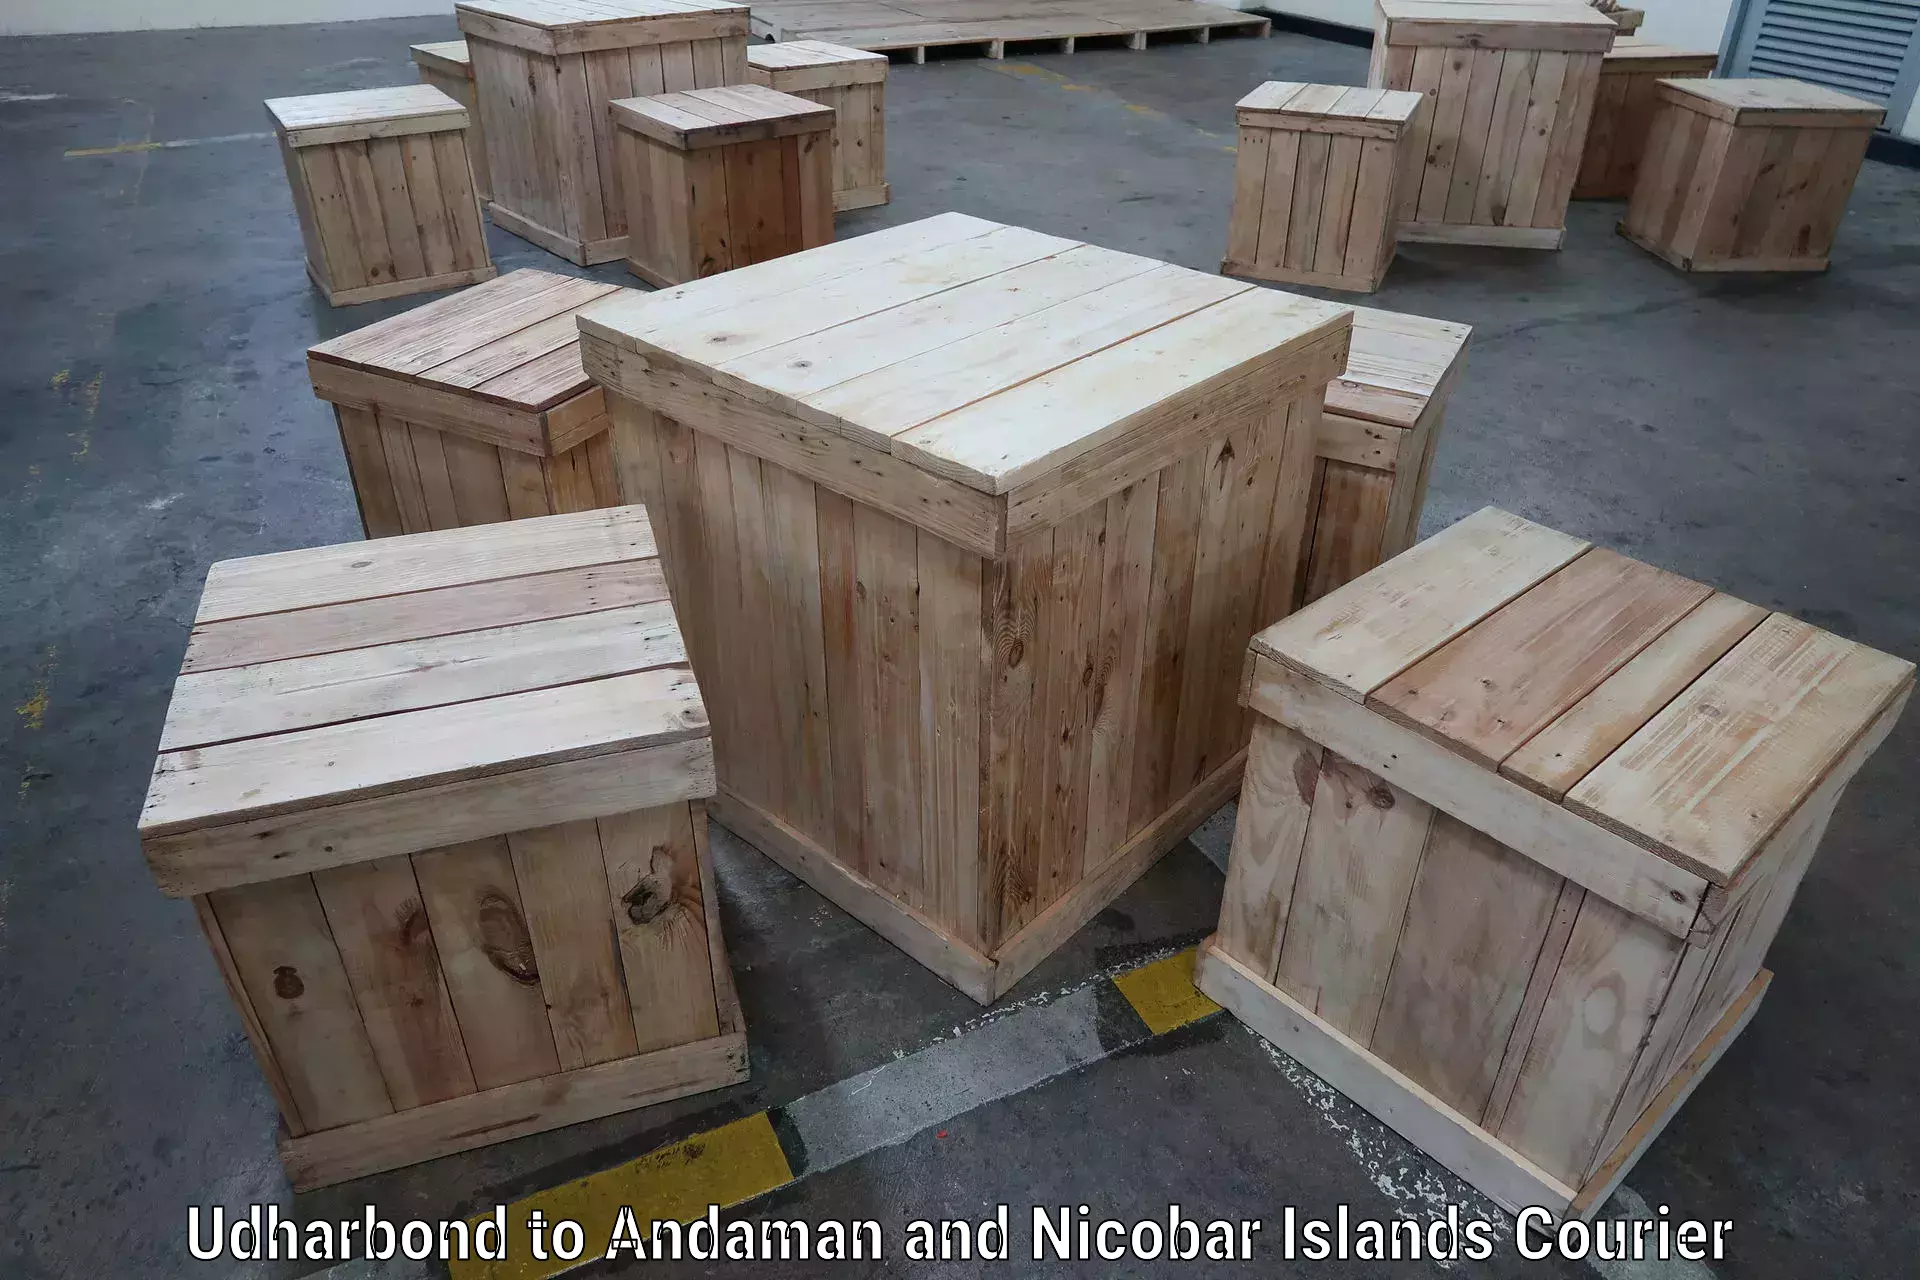 Efficient cargo handling Udharbond to North And Middle Andaman